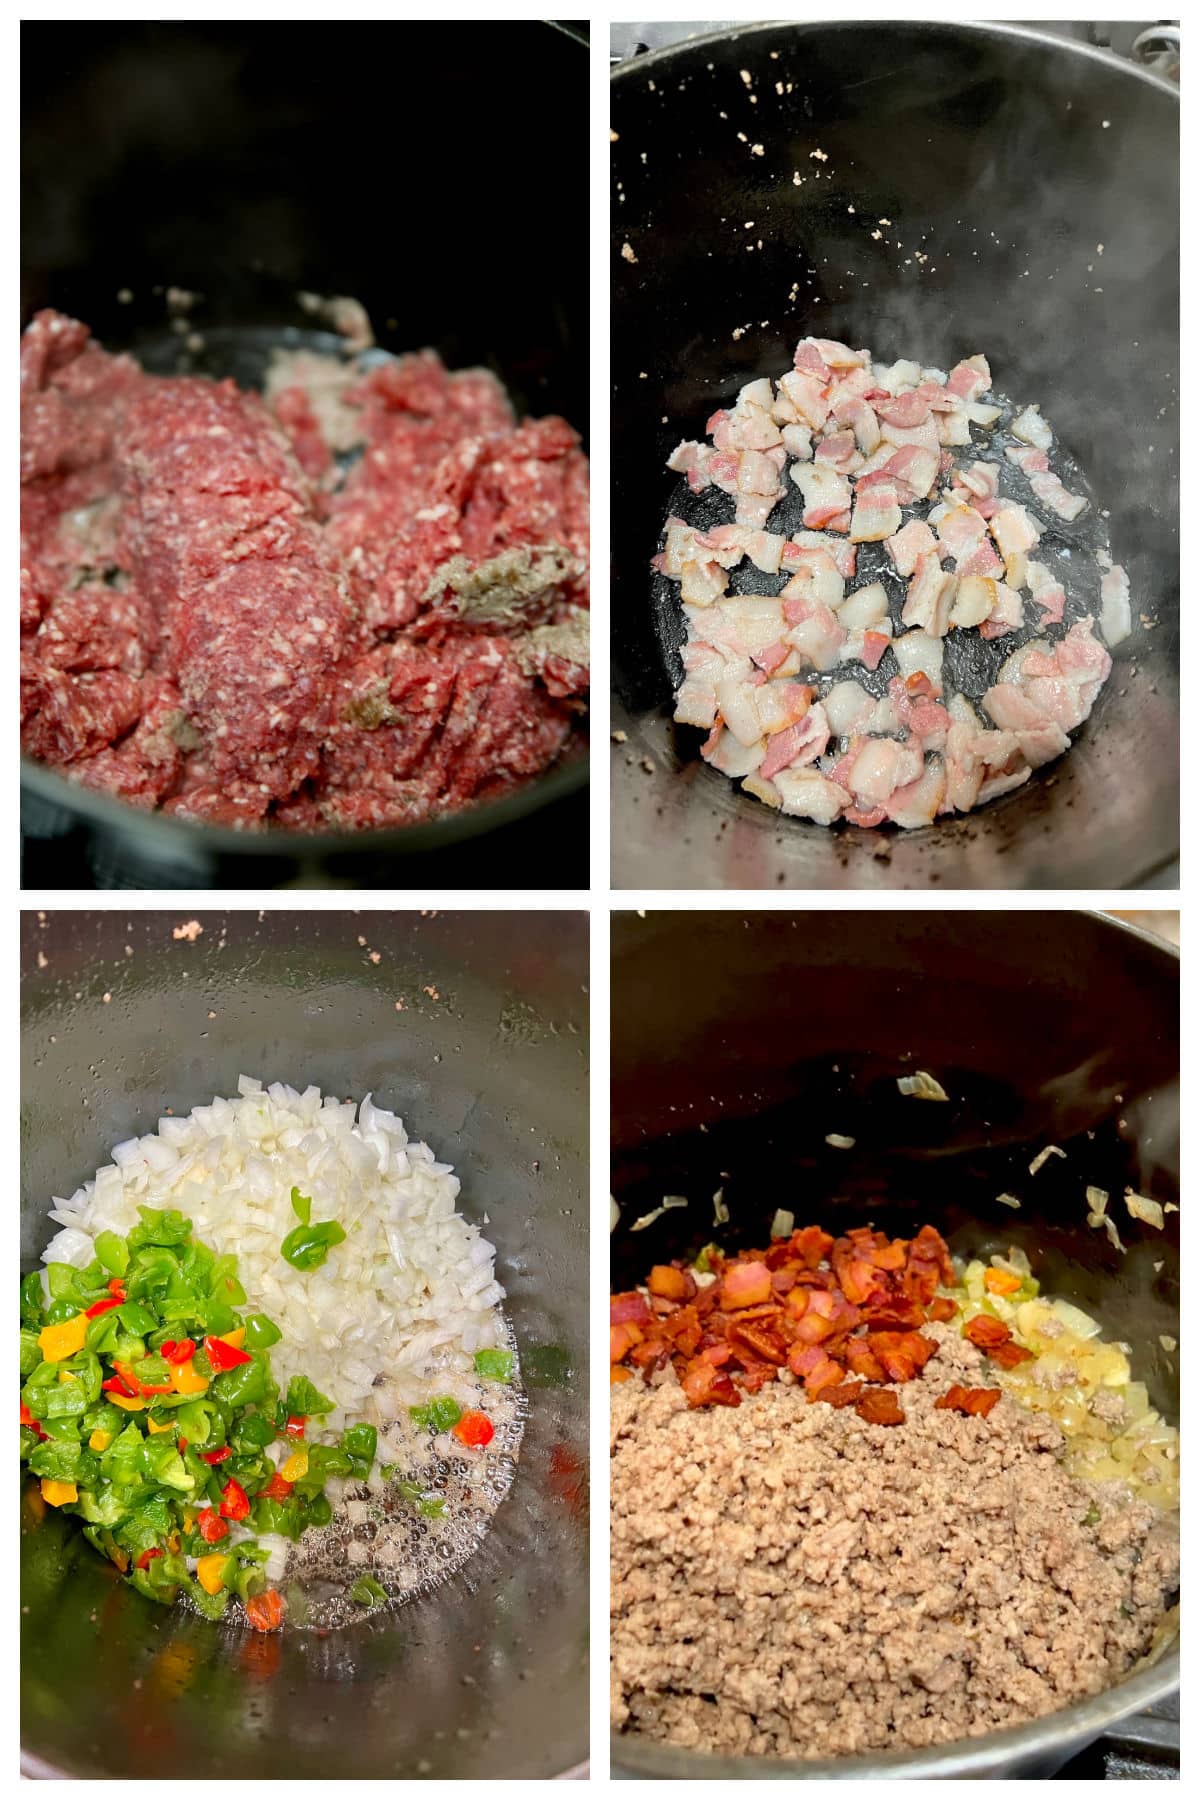 Making Texas chili collage with ground beef and veegetables.